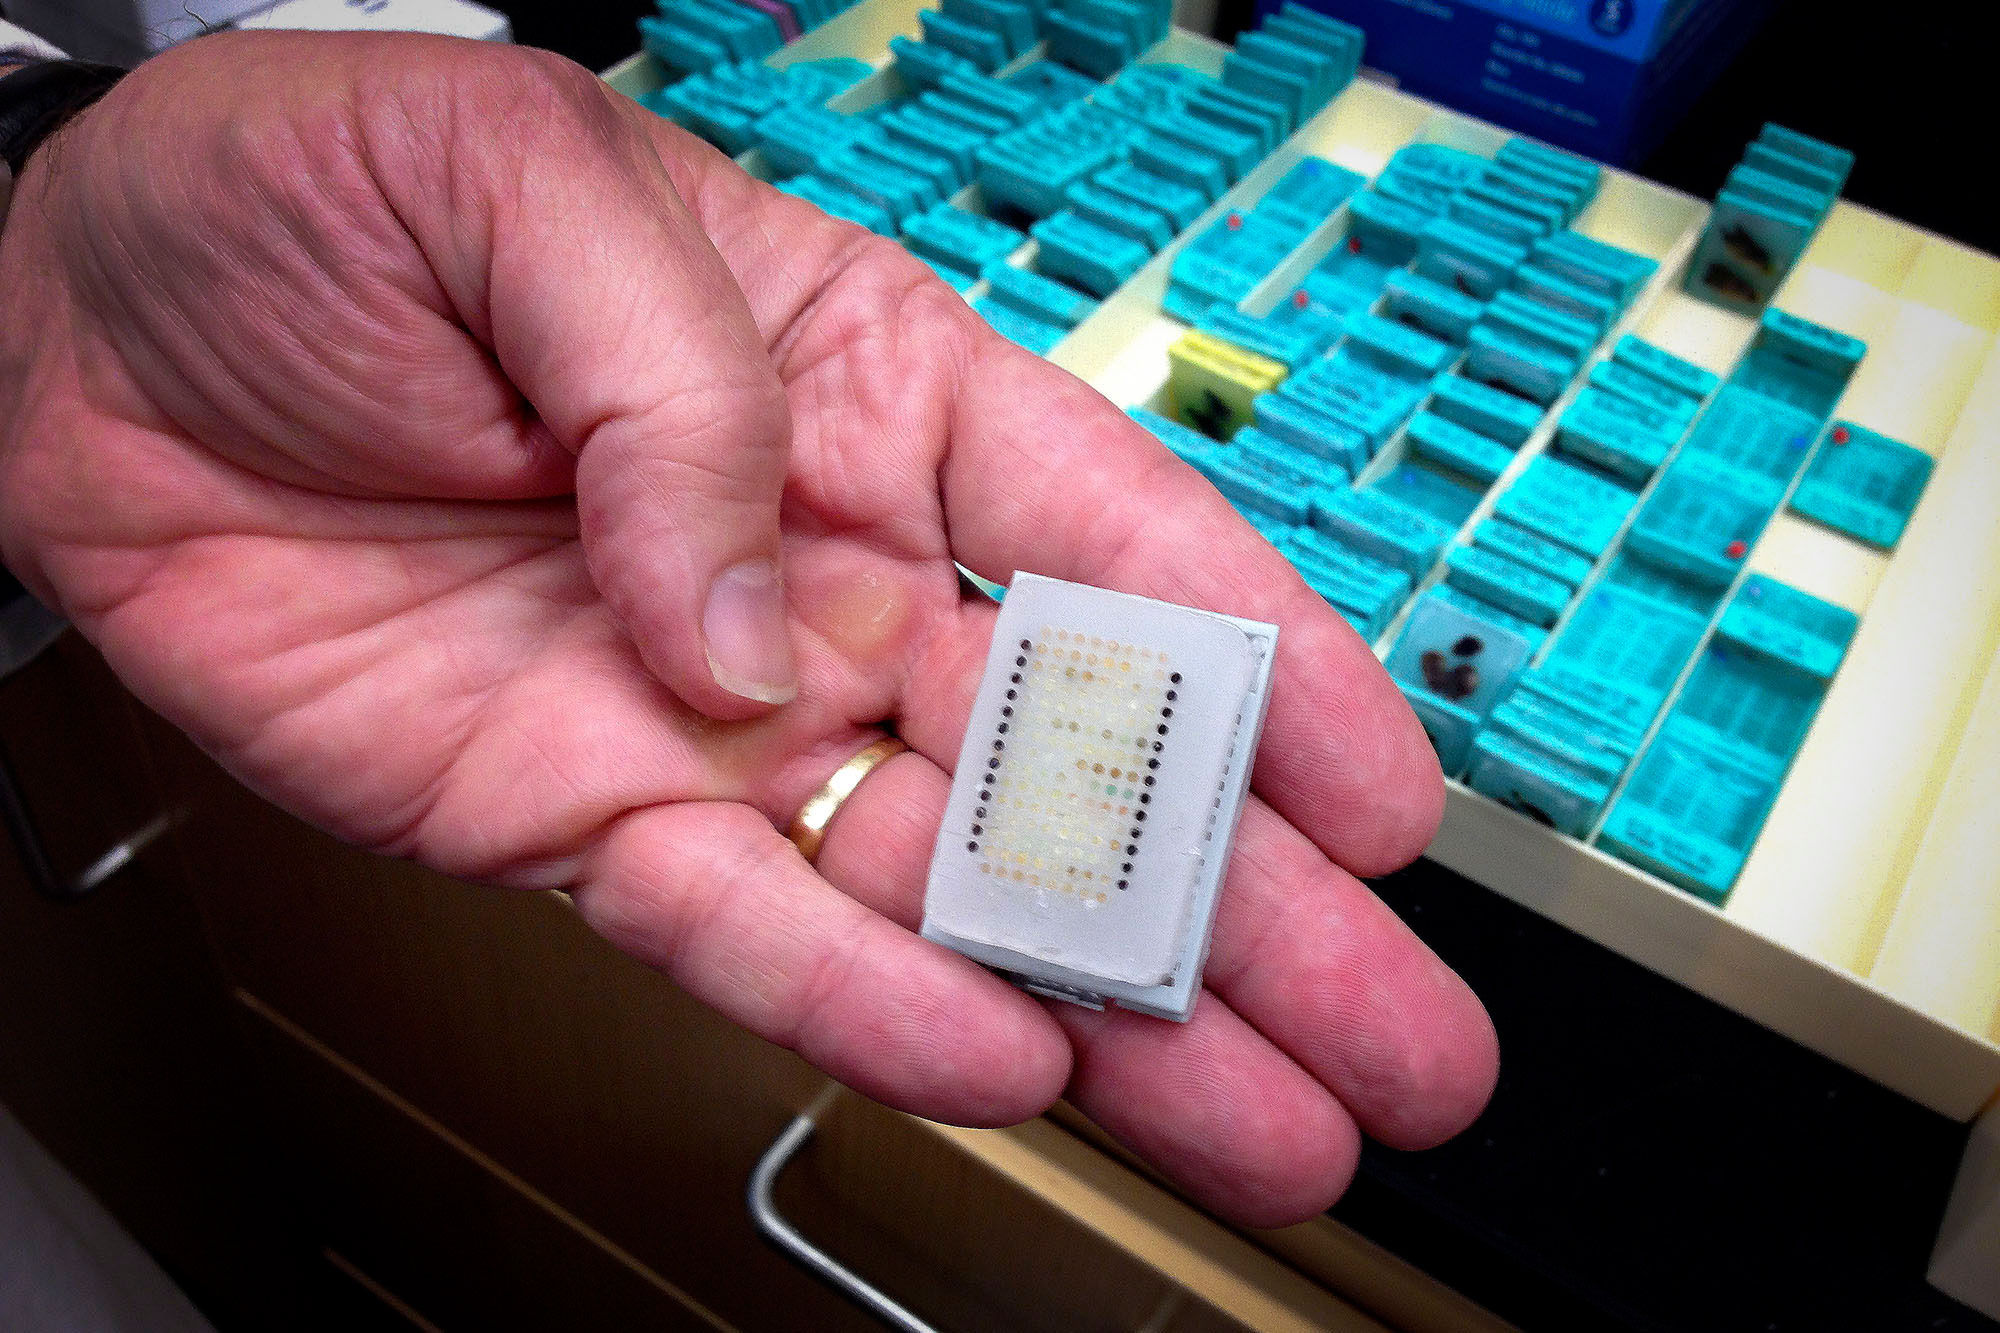 Person holding a microarray